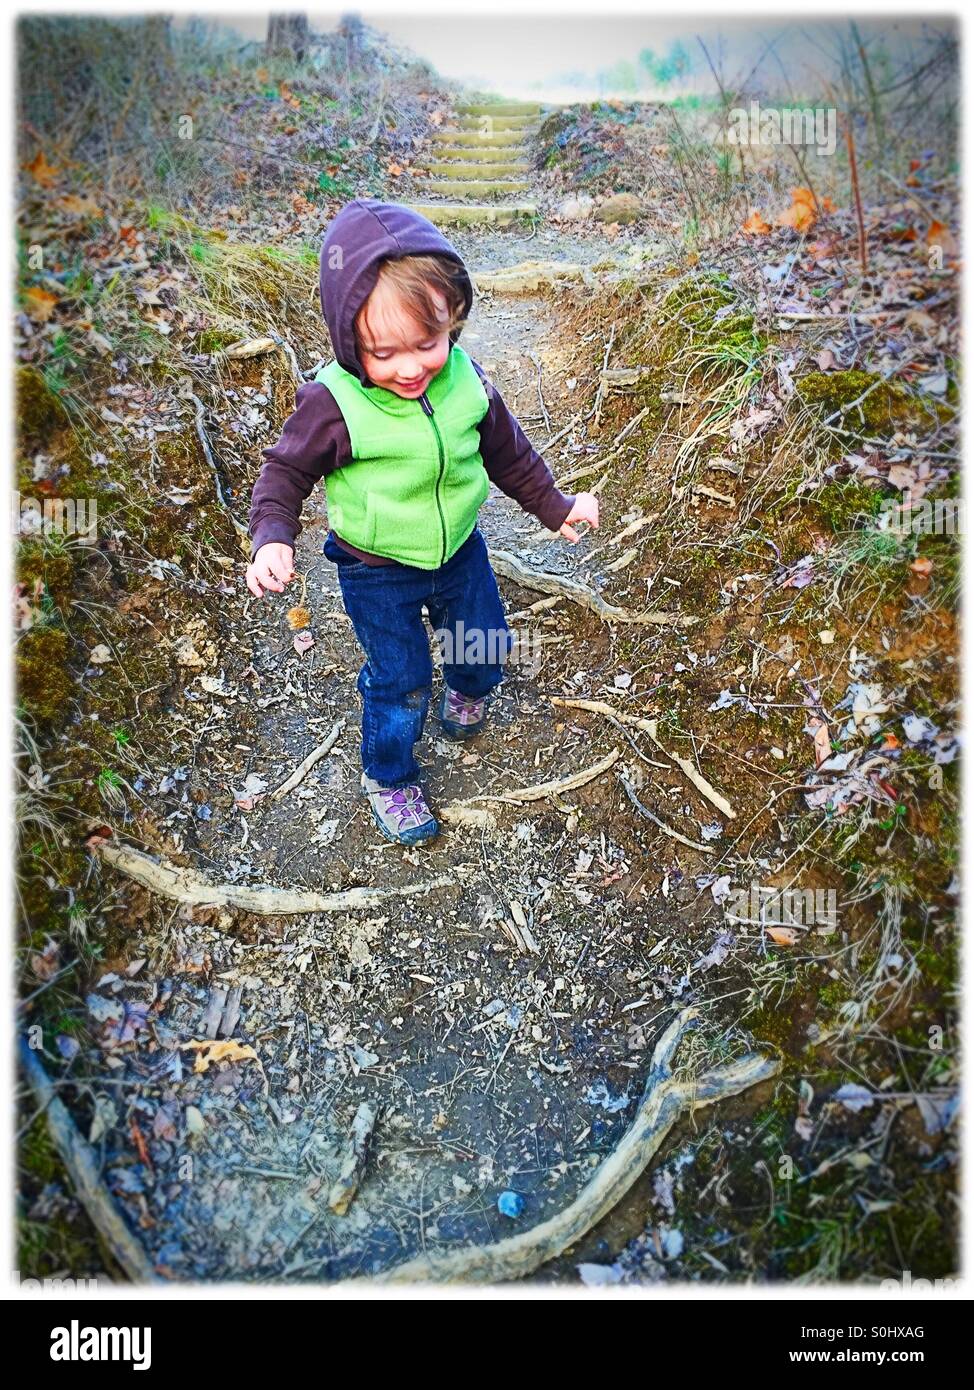 Toddler on a hike Stock Photo